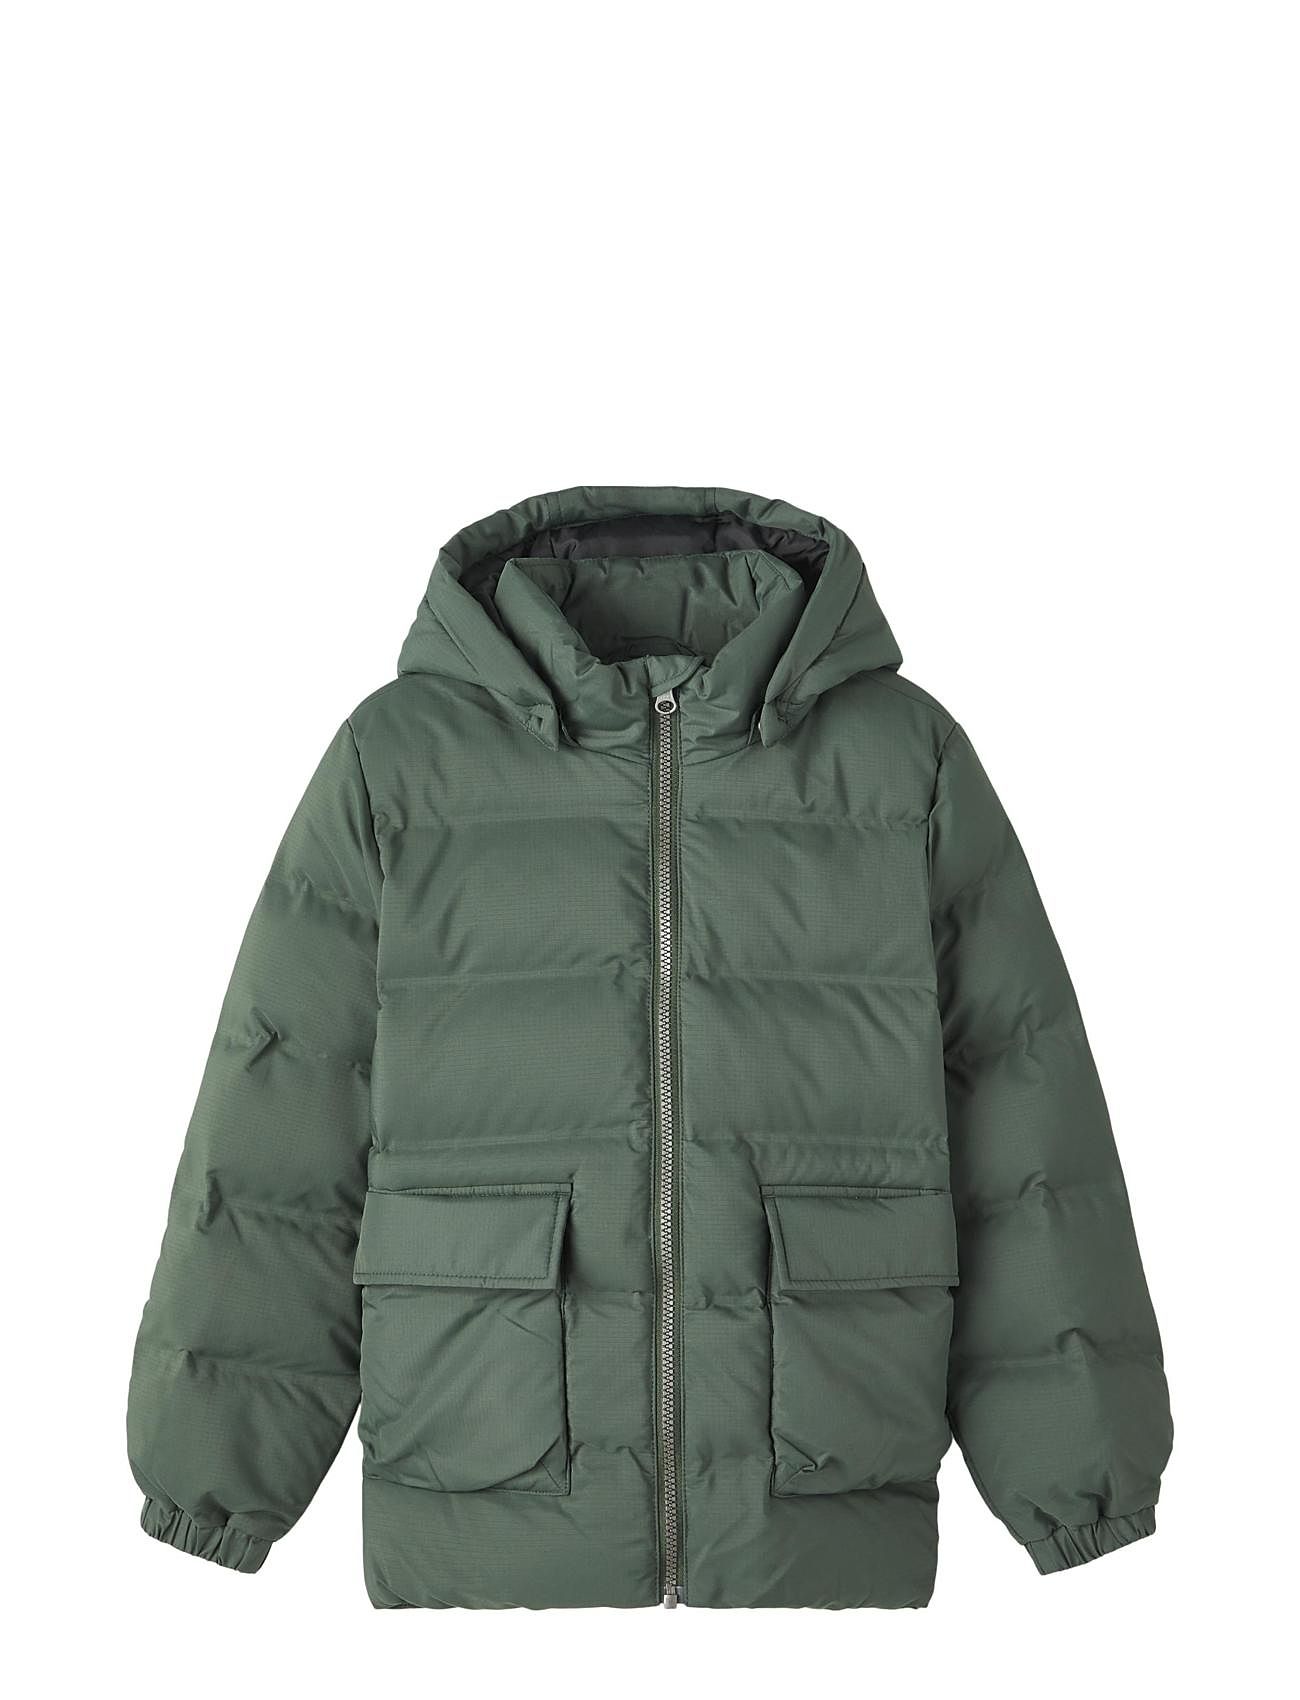 delivery at it Nkmmellow €. name easy and Jacket Padded Buy & Puffer from Tb Boozt.com. online Fast it returns 22.50 - Puffer name